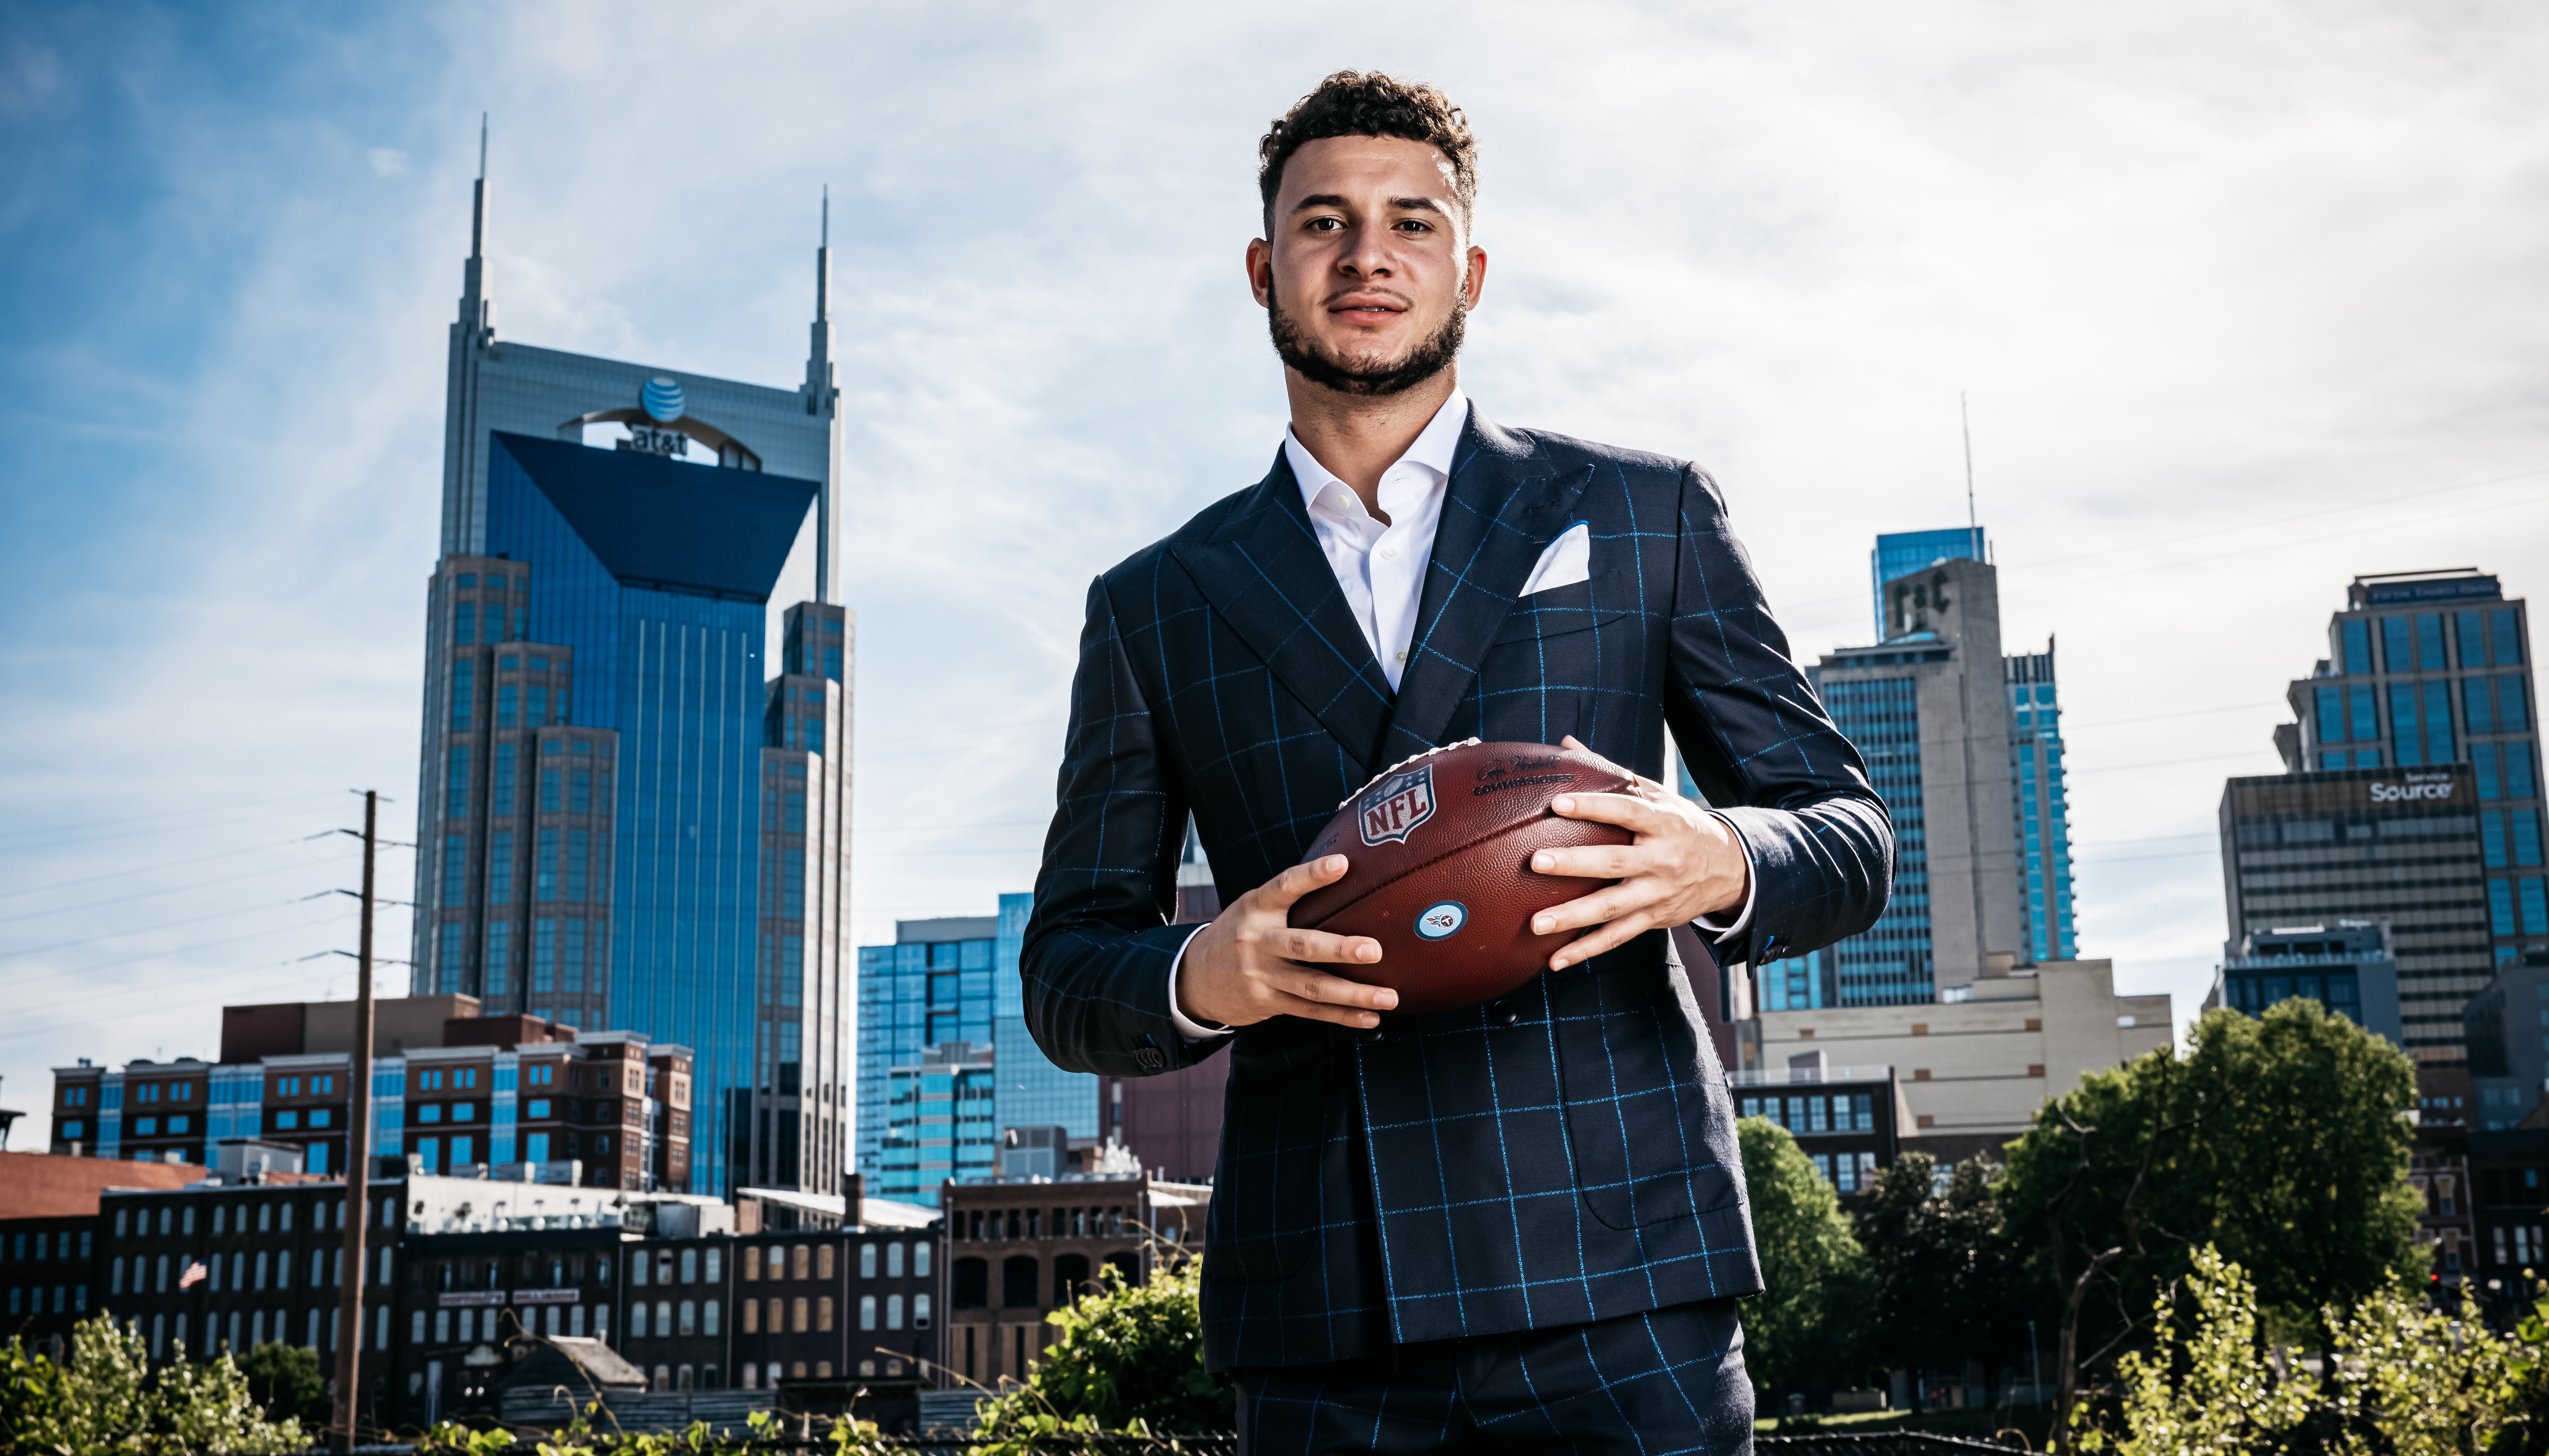 Read Welcome to Nashville, Caleb Farley by Tennessee Titans